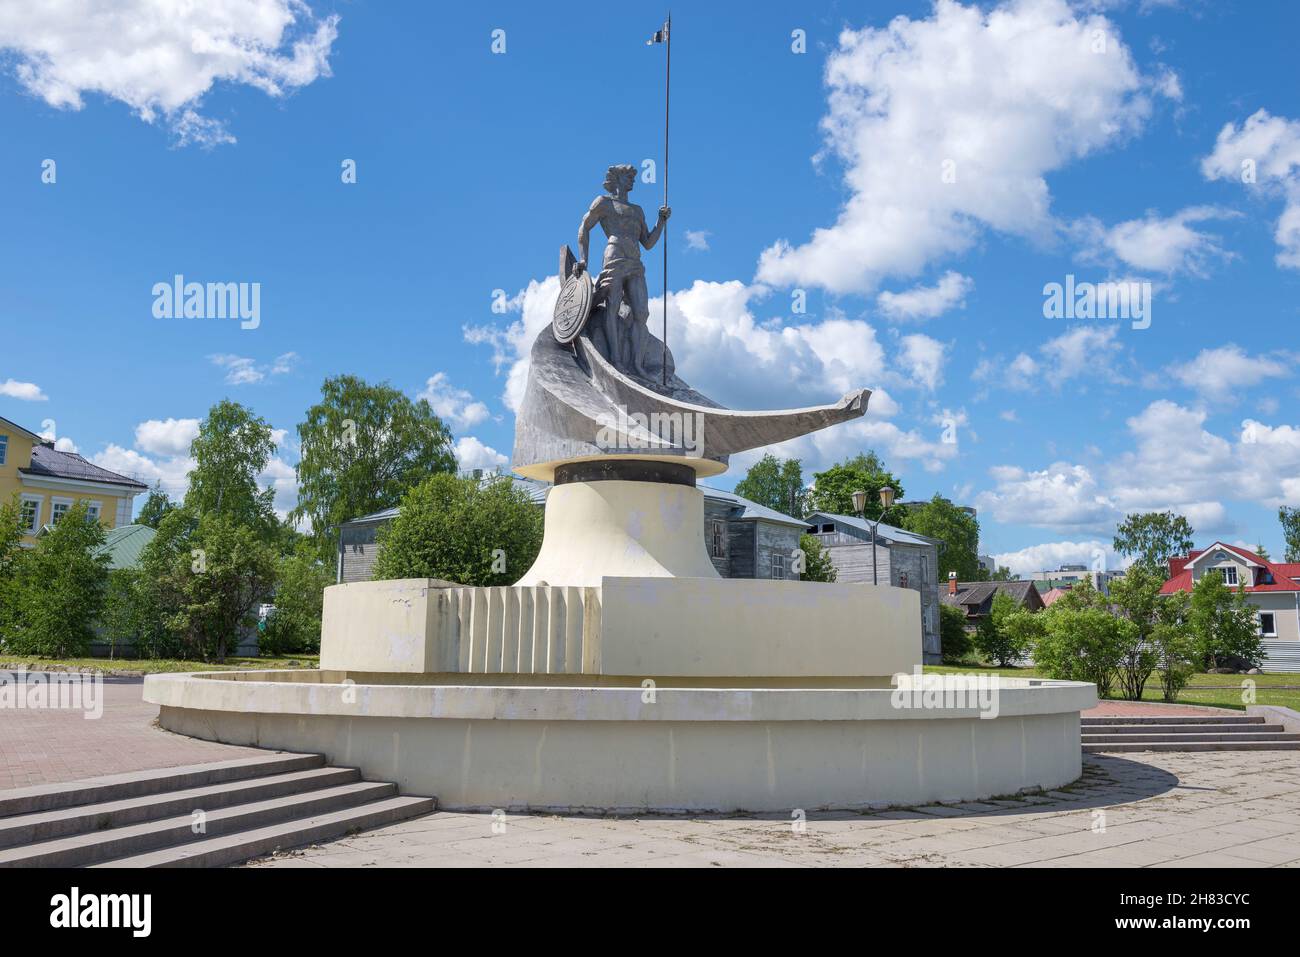 PETROZAVODSK, RUSSIA - JUNE 12, 2020: Sculpture 'Onego' (Birth of Petrozavodsk) close-up on a sunny June day Stock Photo